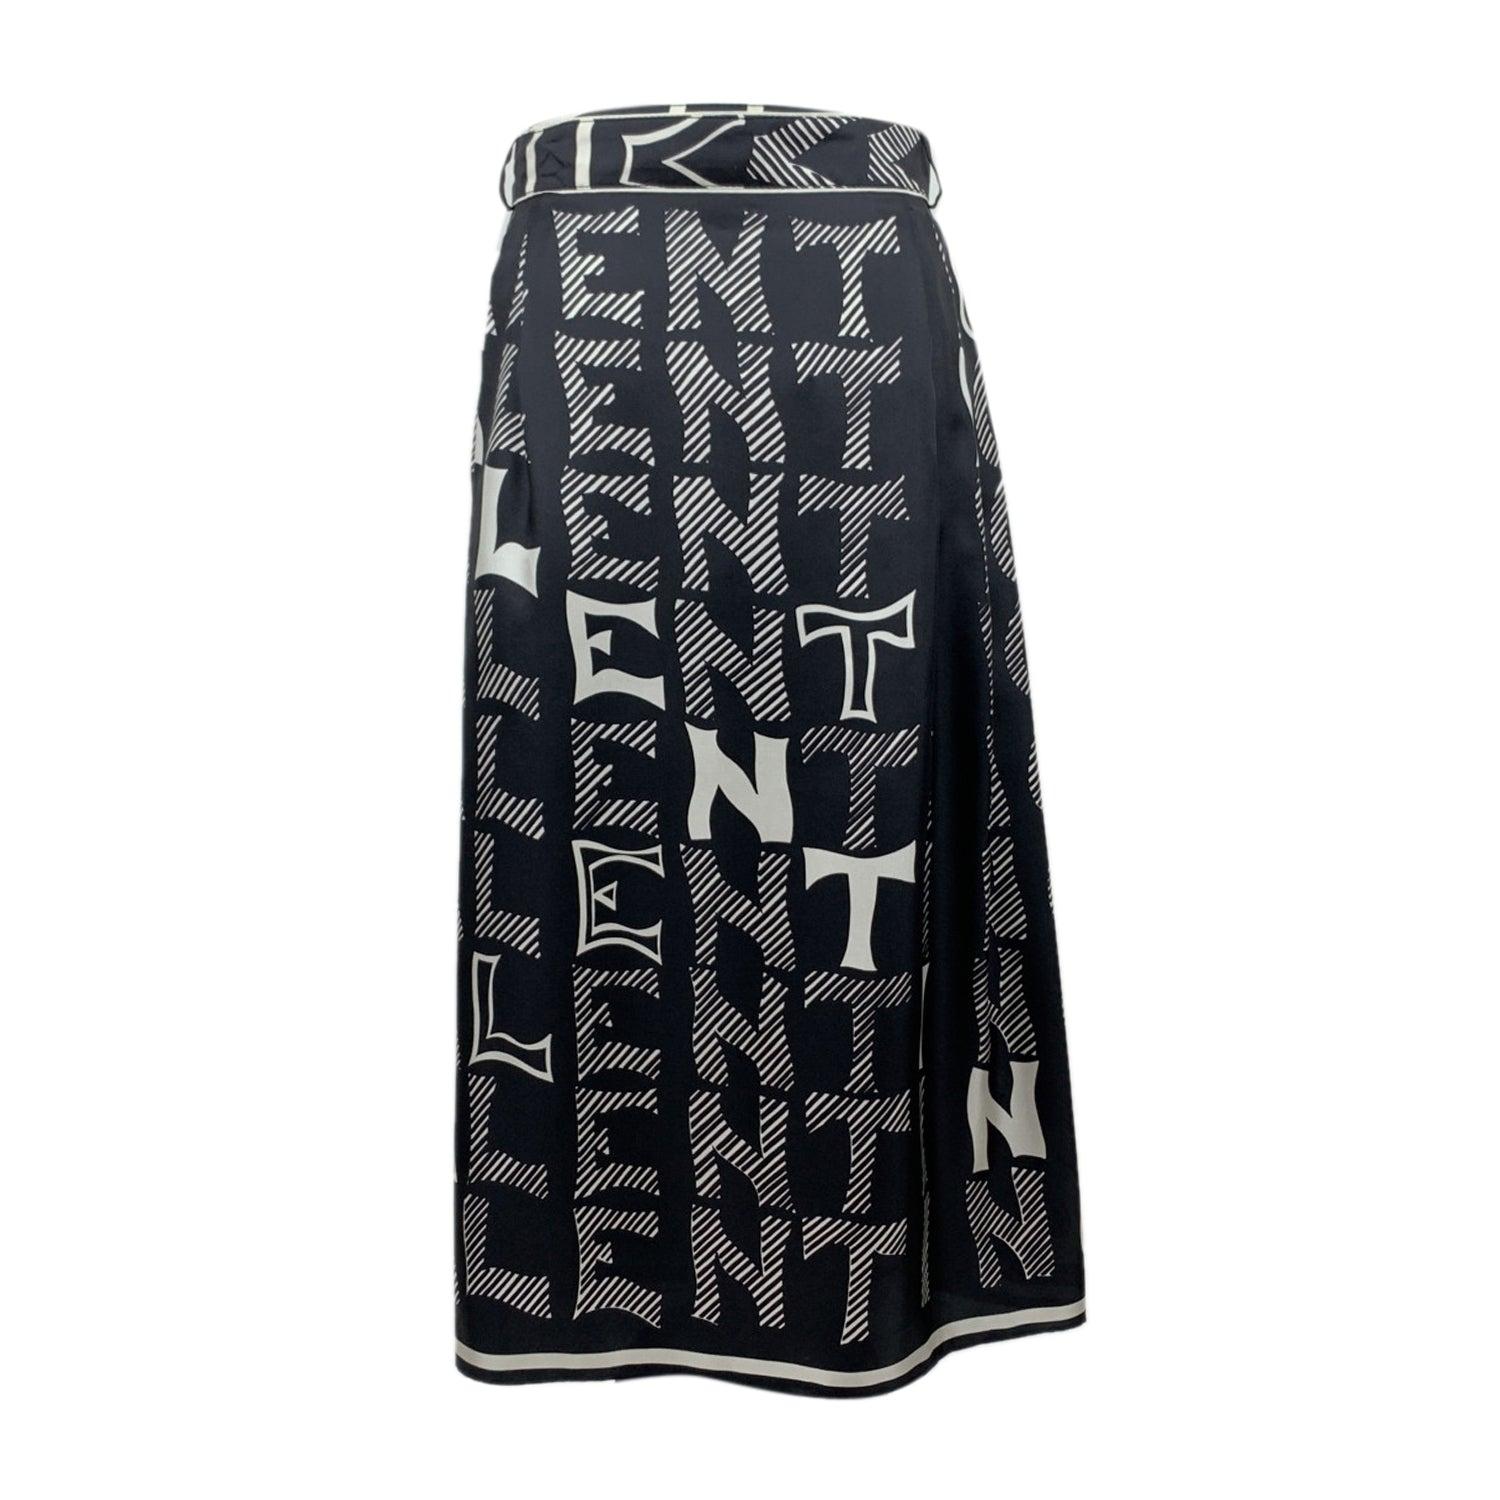 Valentino black and white silk long skirt with contrast Valentino signature pattern. Side button closure. Belted waistline. Front double slits. Composition: 100% Silk Size: 42 IT (The size shown for this item is the size indicated by the designer on